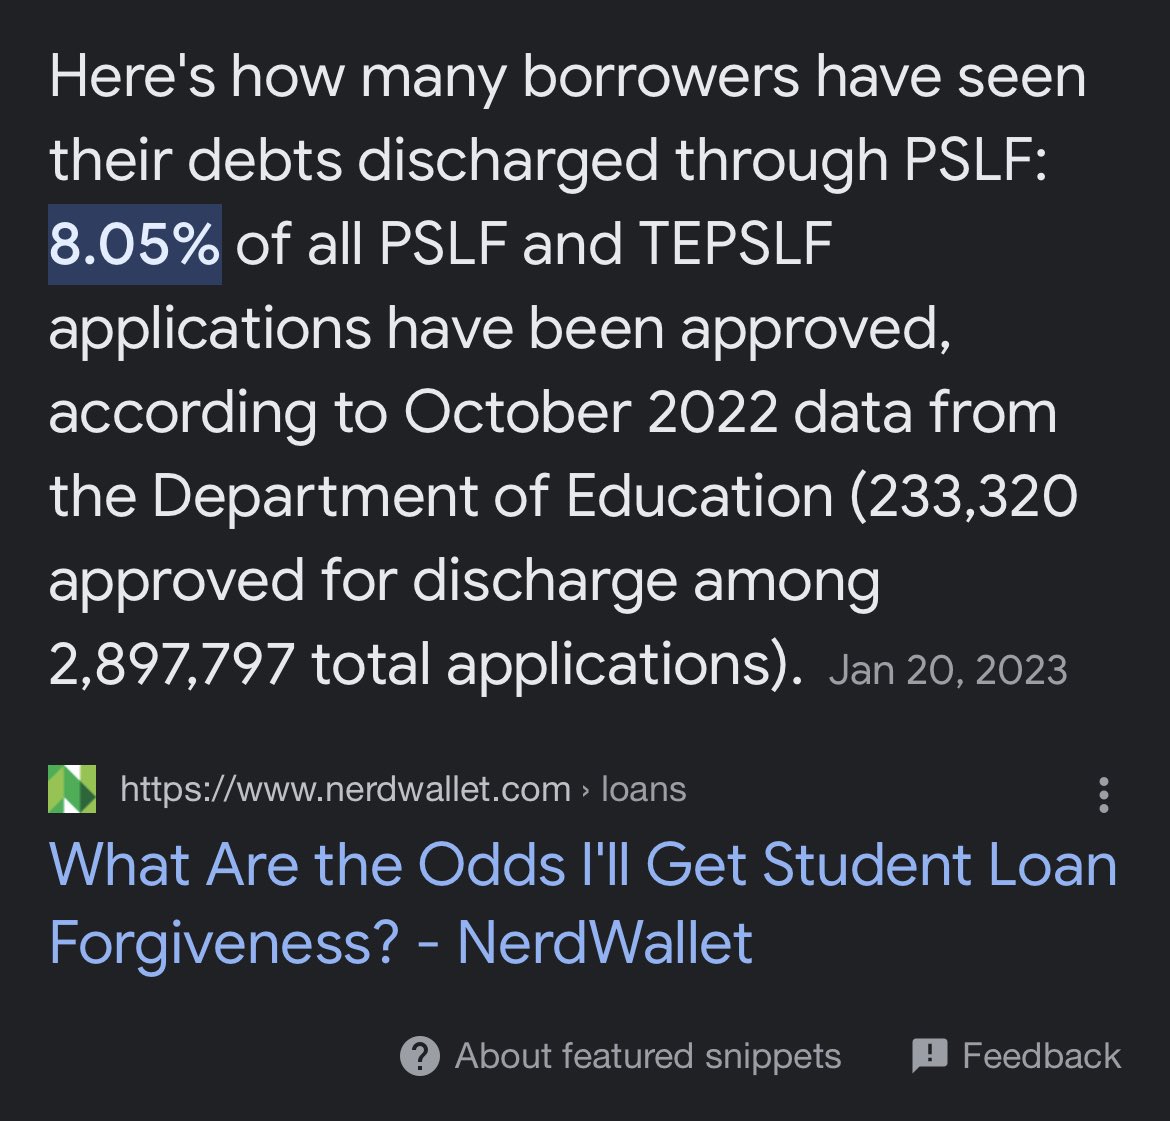 @Jerry27735500 @aarthiswami @MarketWatch @JillianBerman @theSBPC @DebtCrisisOrg @StrikeDebt I know you’re asking this in bad faith but one reason I felt comfortable going into teaching is that my advisors and other authority figures touted the loan forgiveness I’d be eligible for. Which, as it turns out, less than 9% of people who apply for PSLF actually get it.